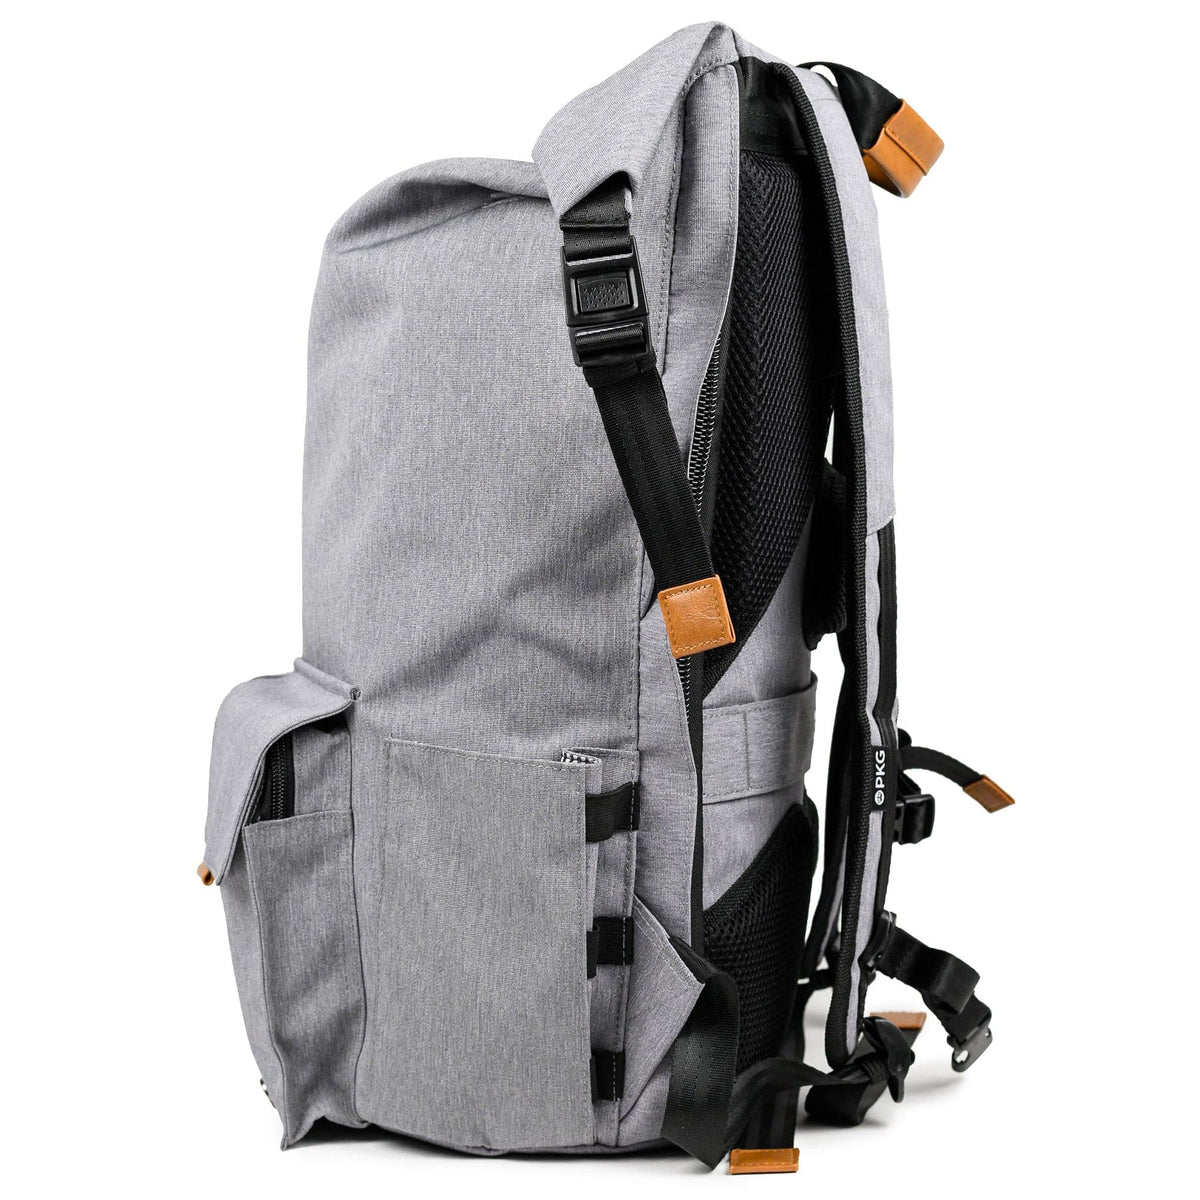 PKG Concord 15" Expandable Roll-Tab Backpack